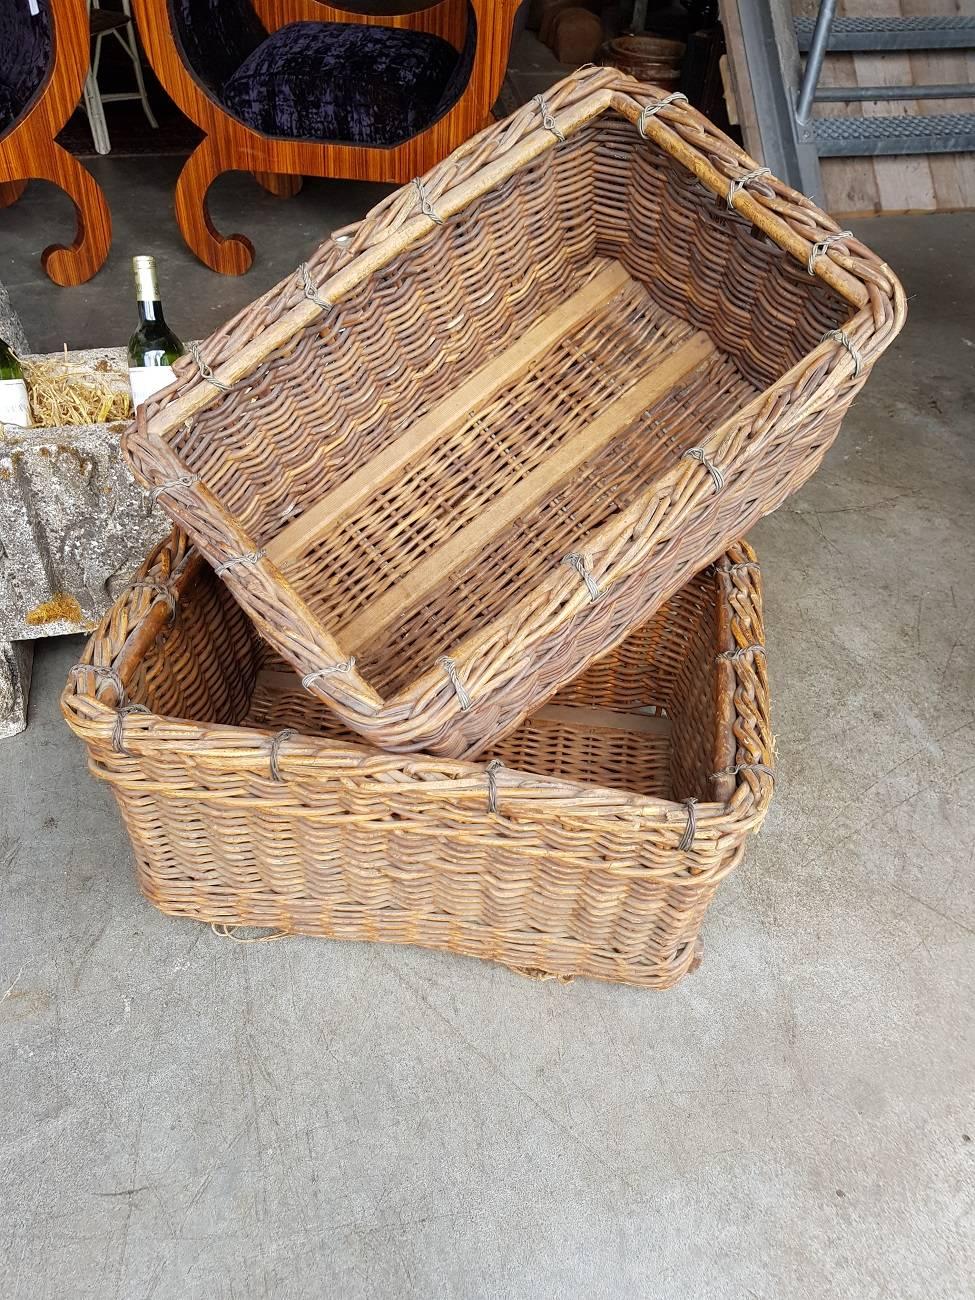 Set of two Belgian wicker baskets made of rattan. The basket are of good quality and with a wonderful patina. Made in the early 20th century.

The measurements are:
Depth 49 cm/ 19.3 inch.
Width 67 cm/ 26.4 inch.
Height 35 cm/ 13.8 inch.

And